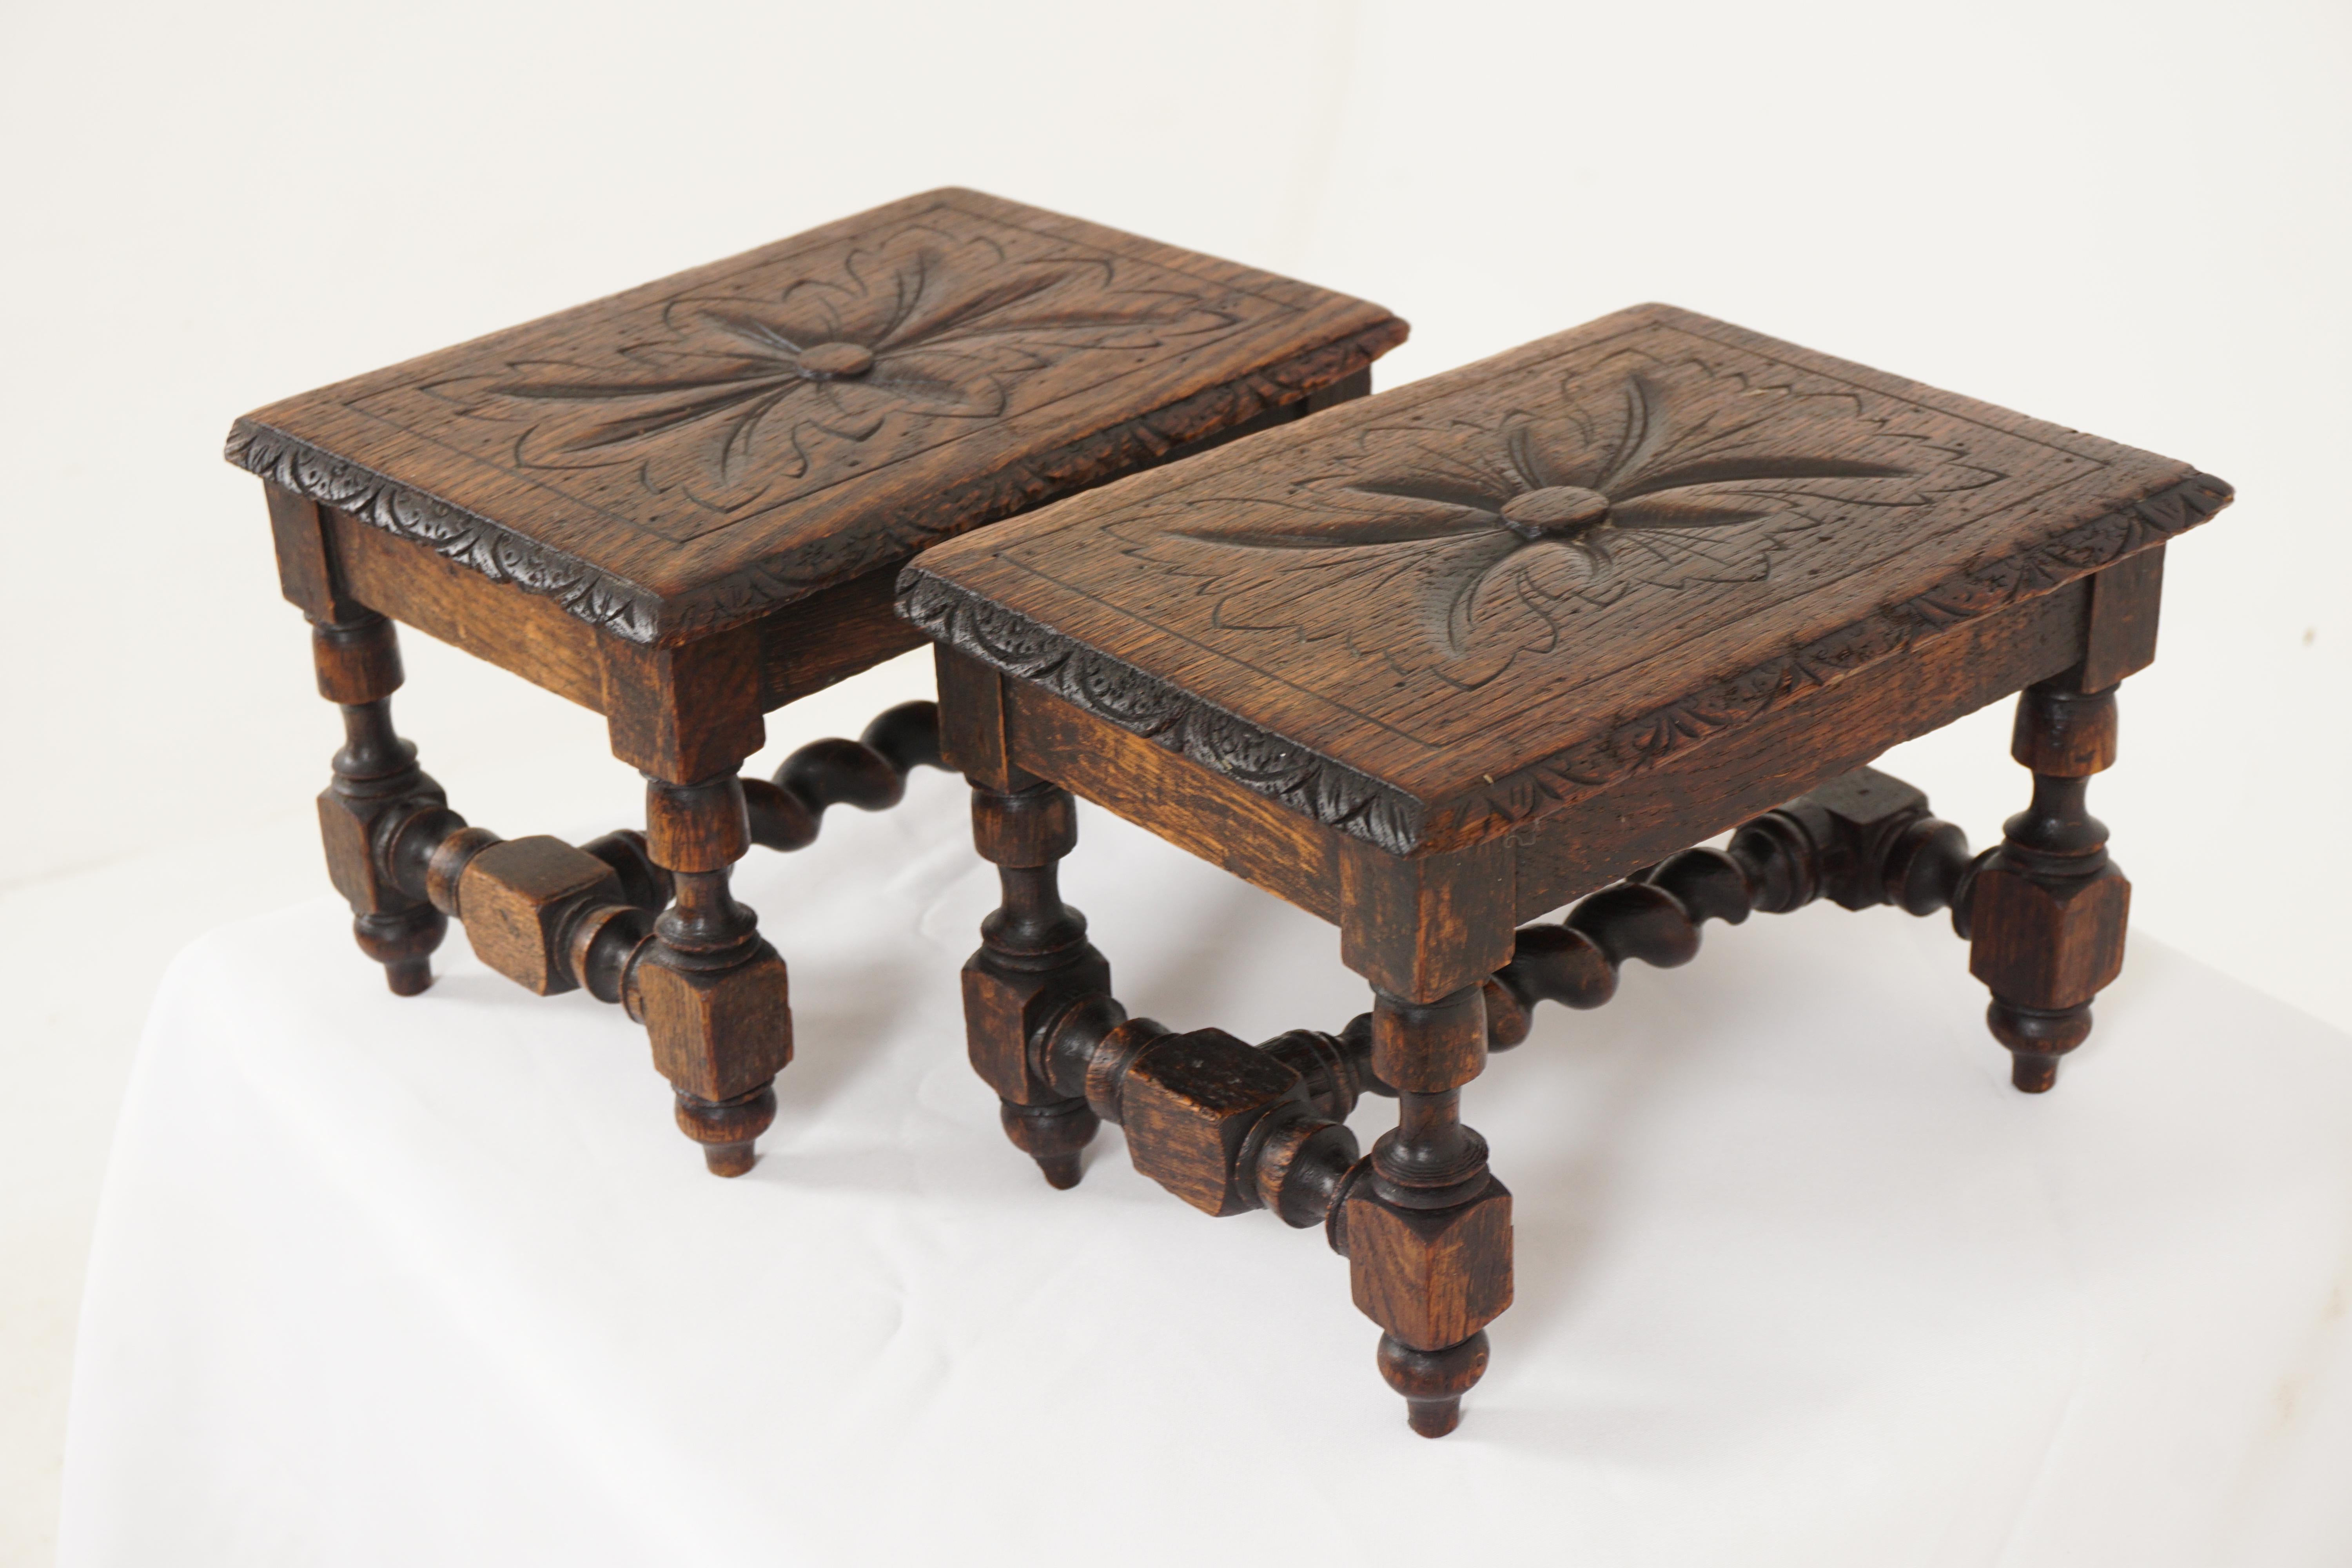 Antique Pair Of Carved Oak Victorian Footstools, Scotland 1870, B2685

Scotland 1870
Solid Oak 
Original Finish
Carved Rectangular Top 
Standing on four legs 
Connected by turned barley twist stretchers
Selling as a pair

Measures: 11.5W x